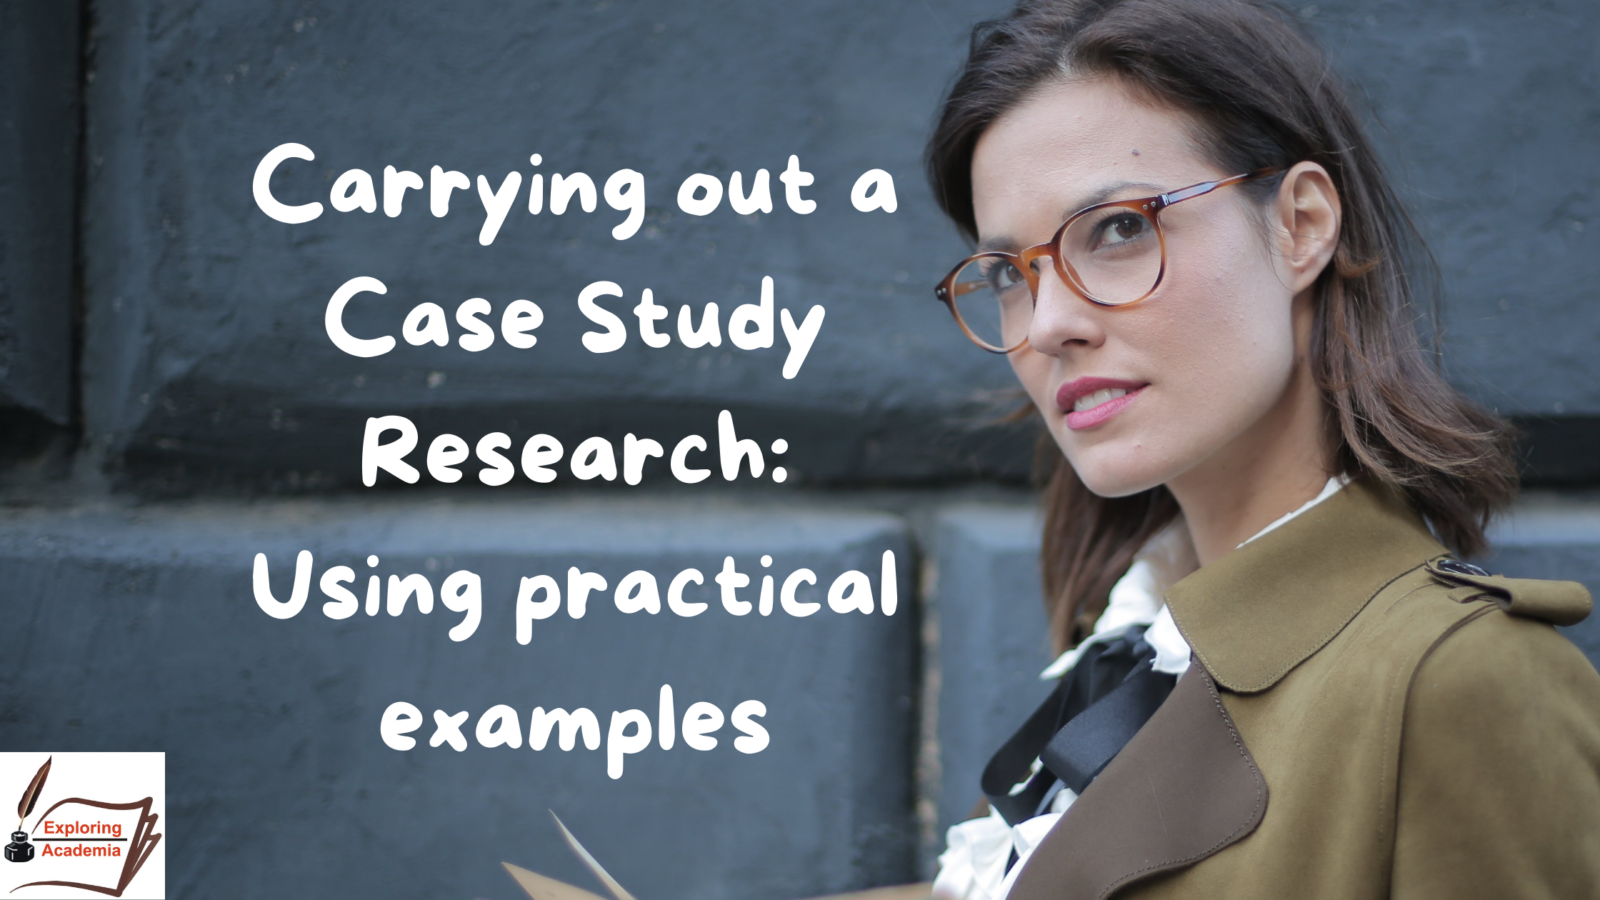 Carrying out a Case Study Research: Using practical examples